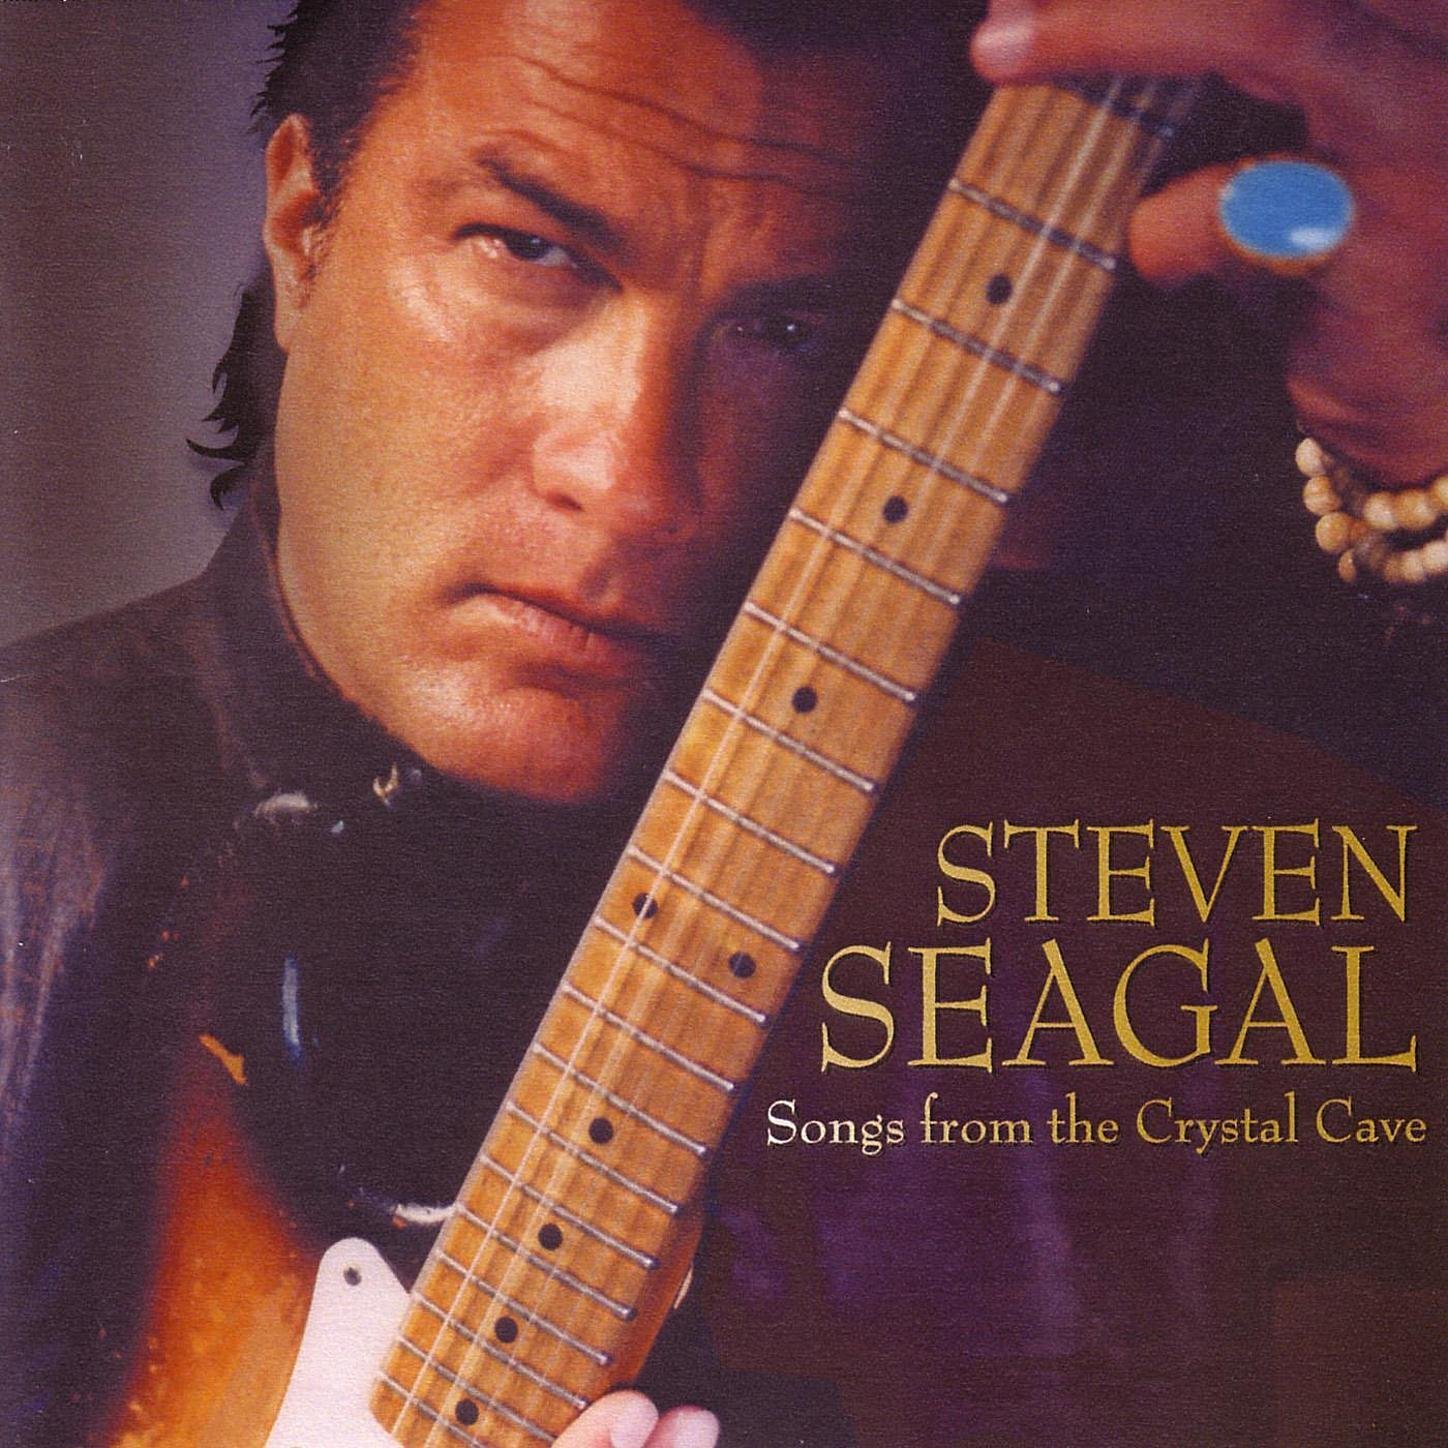 Steven Seagal - Songs from the Crystal Cave (2005)